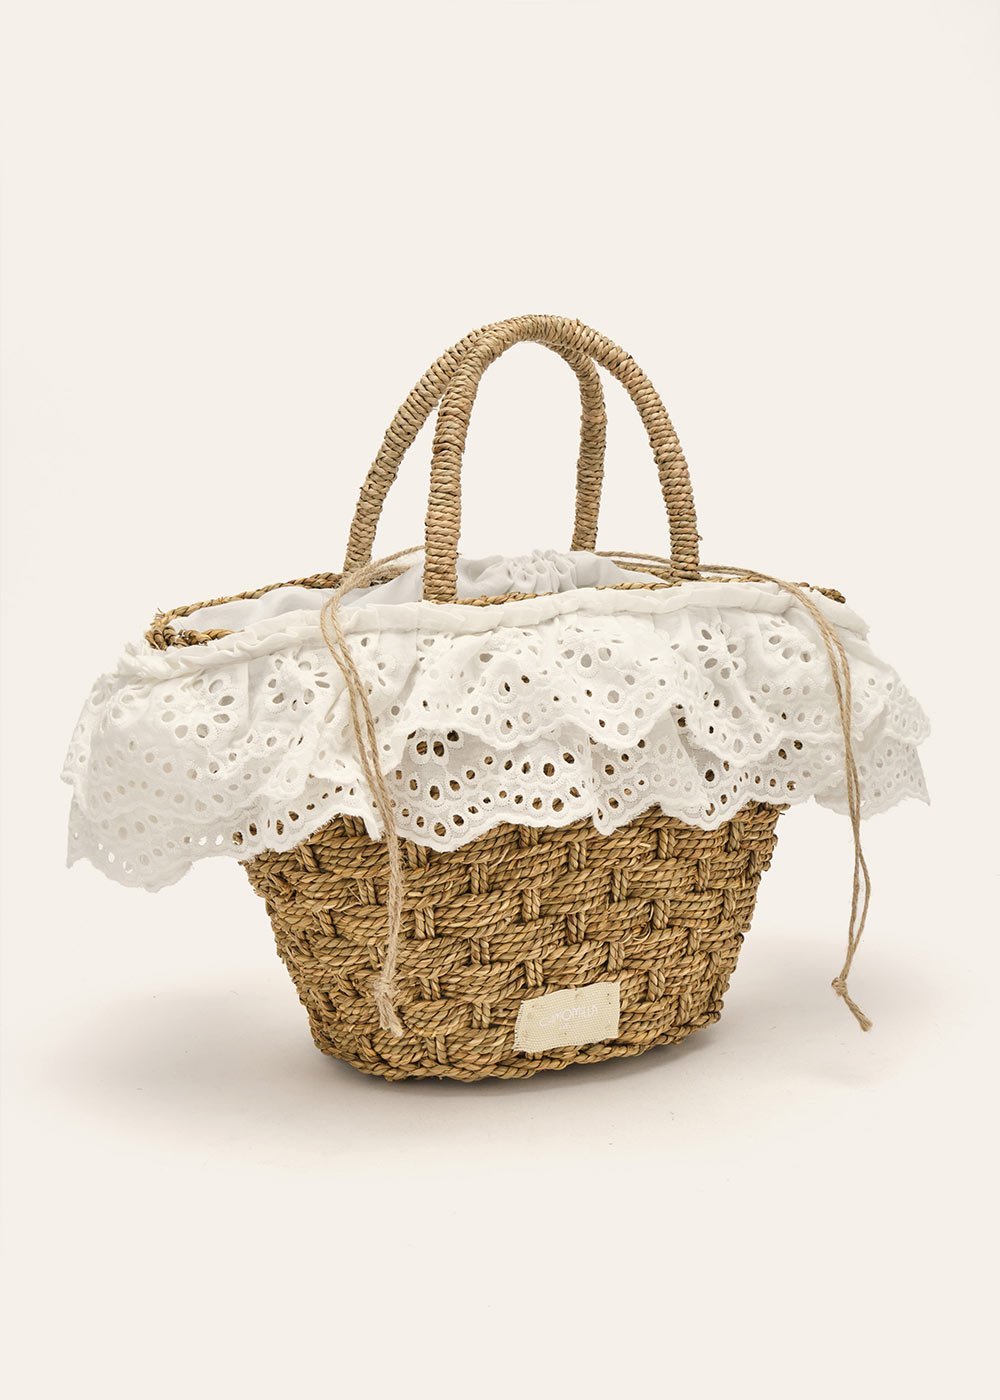 Bernie bag with broderie anglaise details - White - Woman